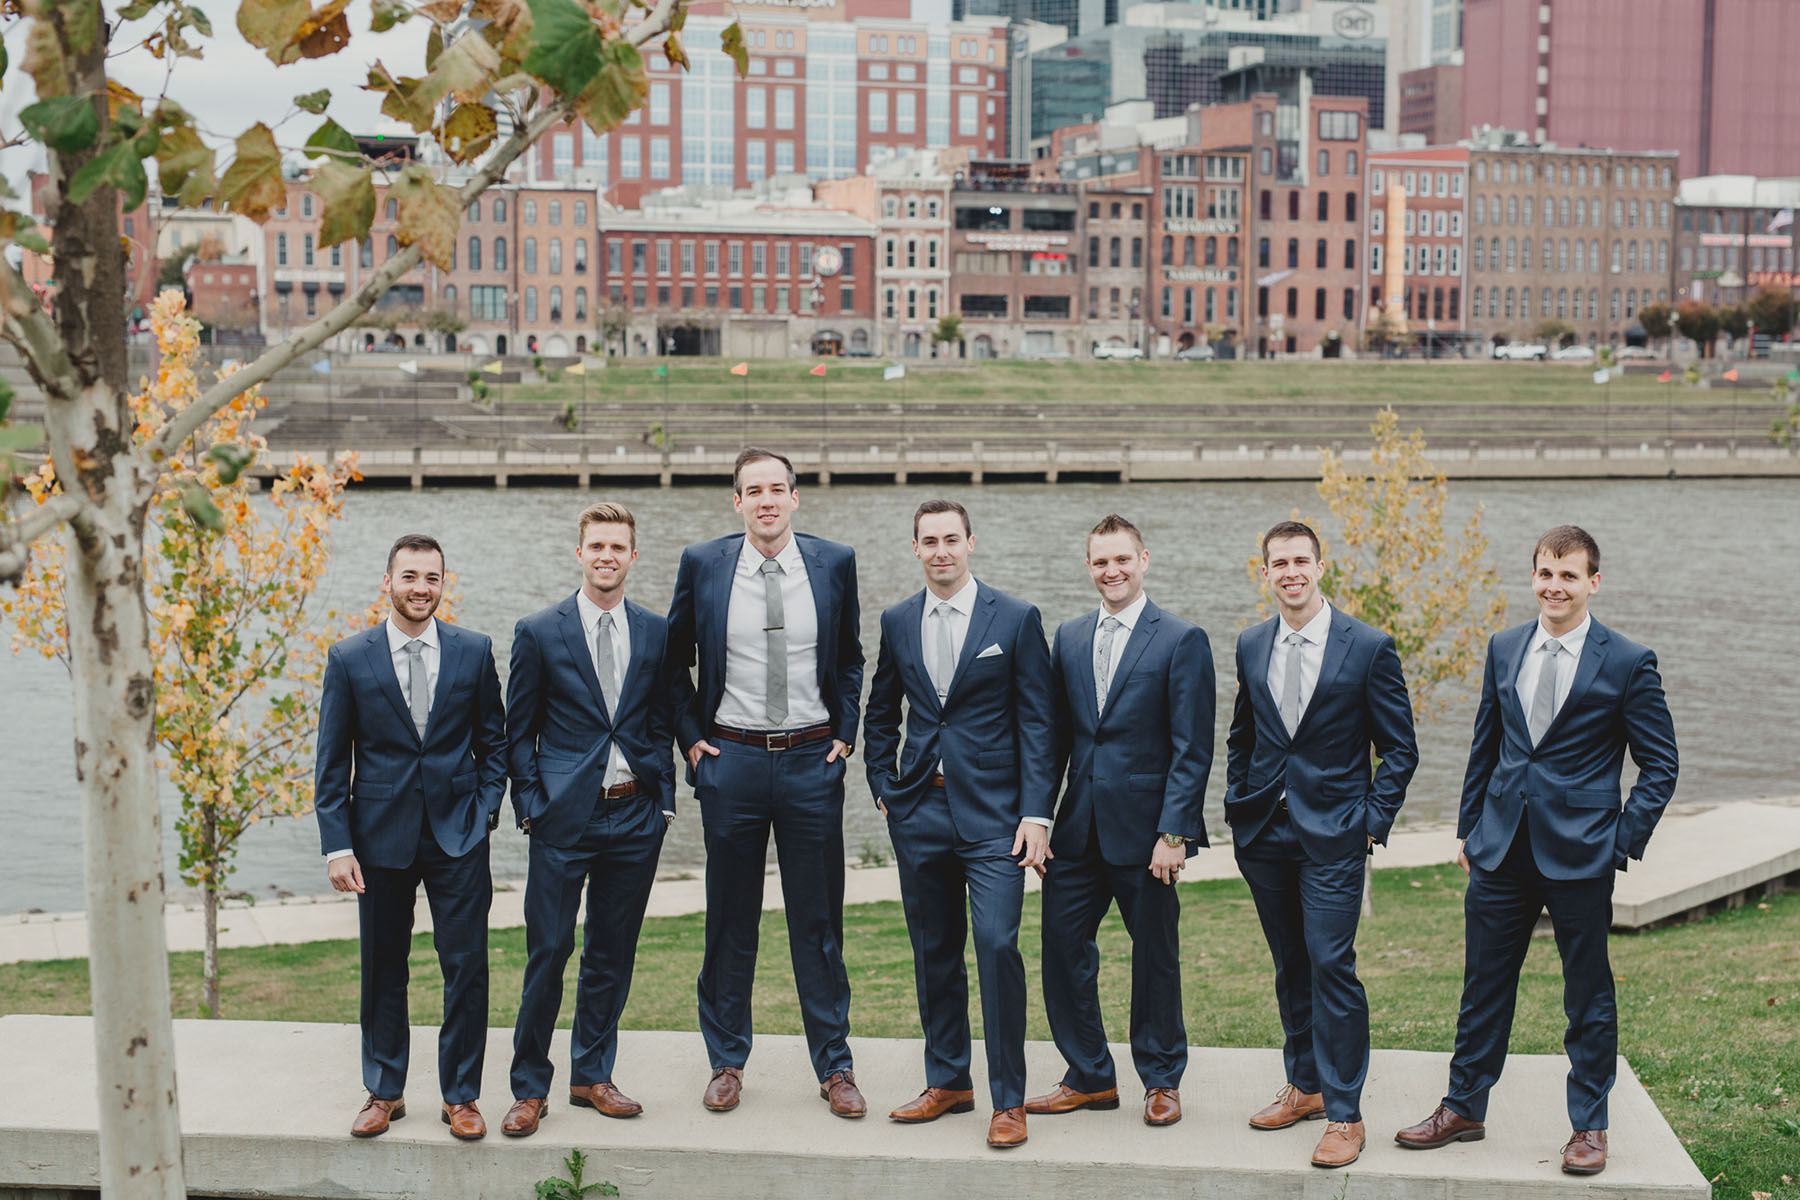 Taylor with Groomsmen on Riverfront